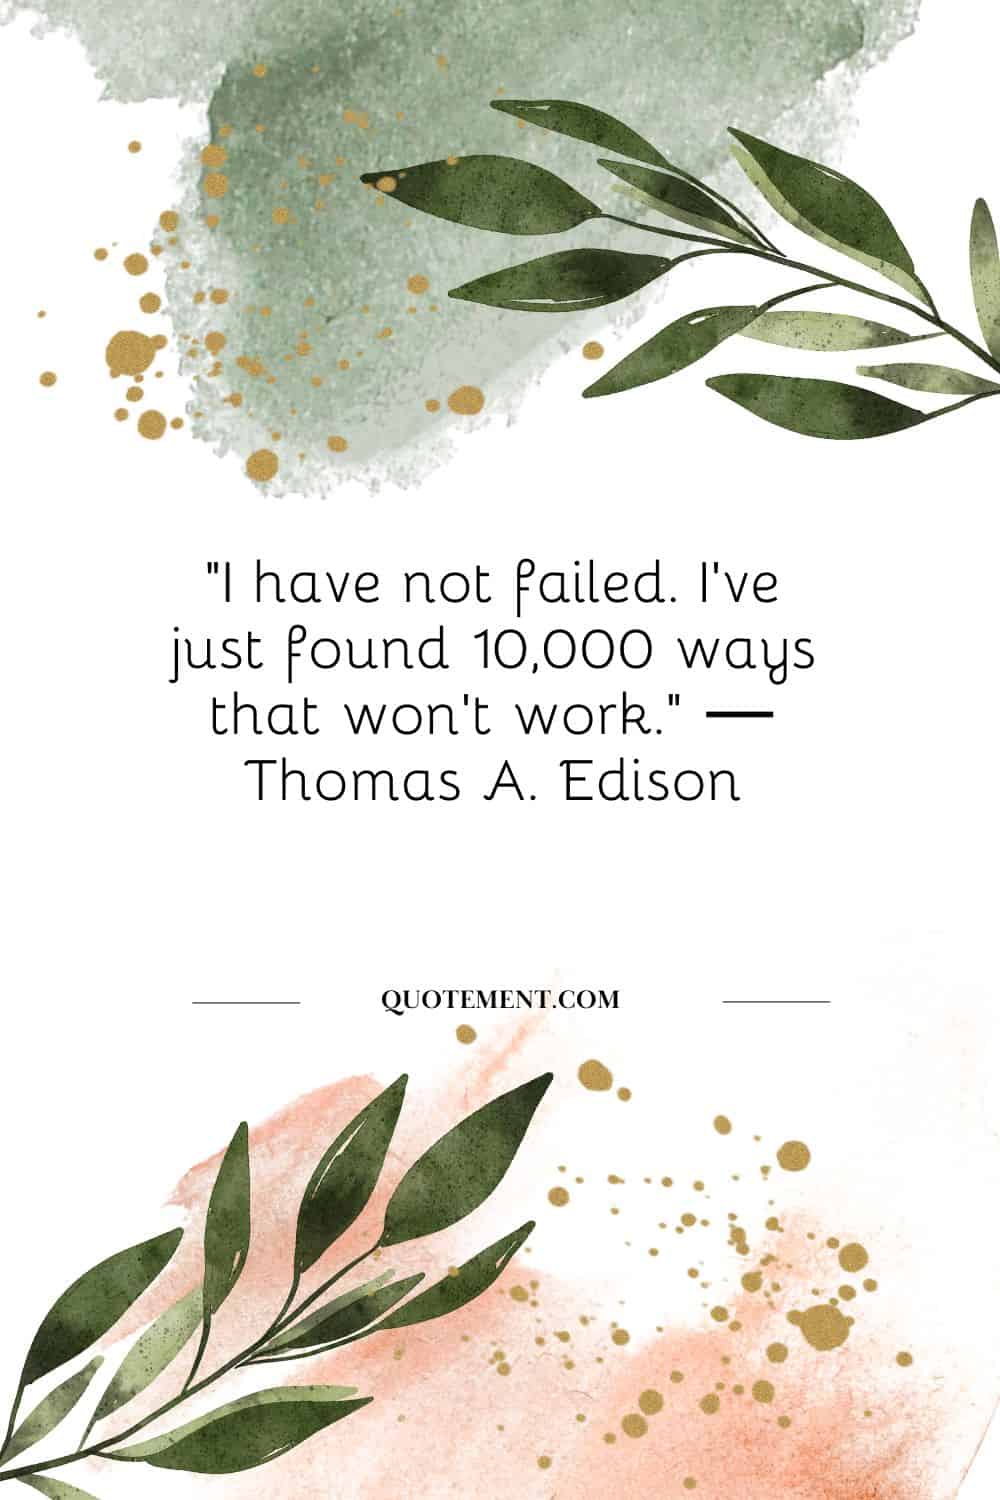 “I have not failed. I’ve just found 10,000 ways that won’t work.” ― Thomas A. Edison